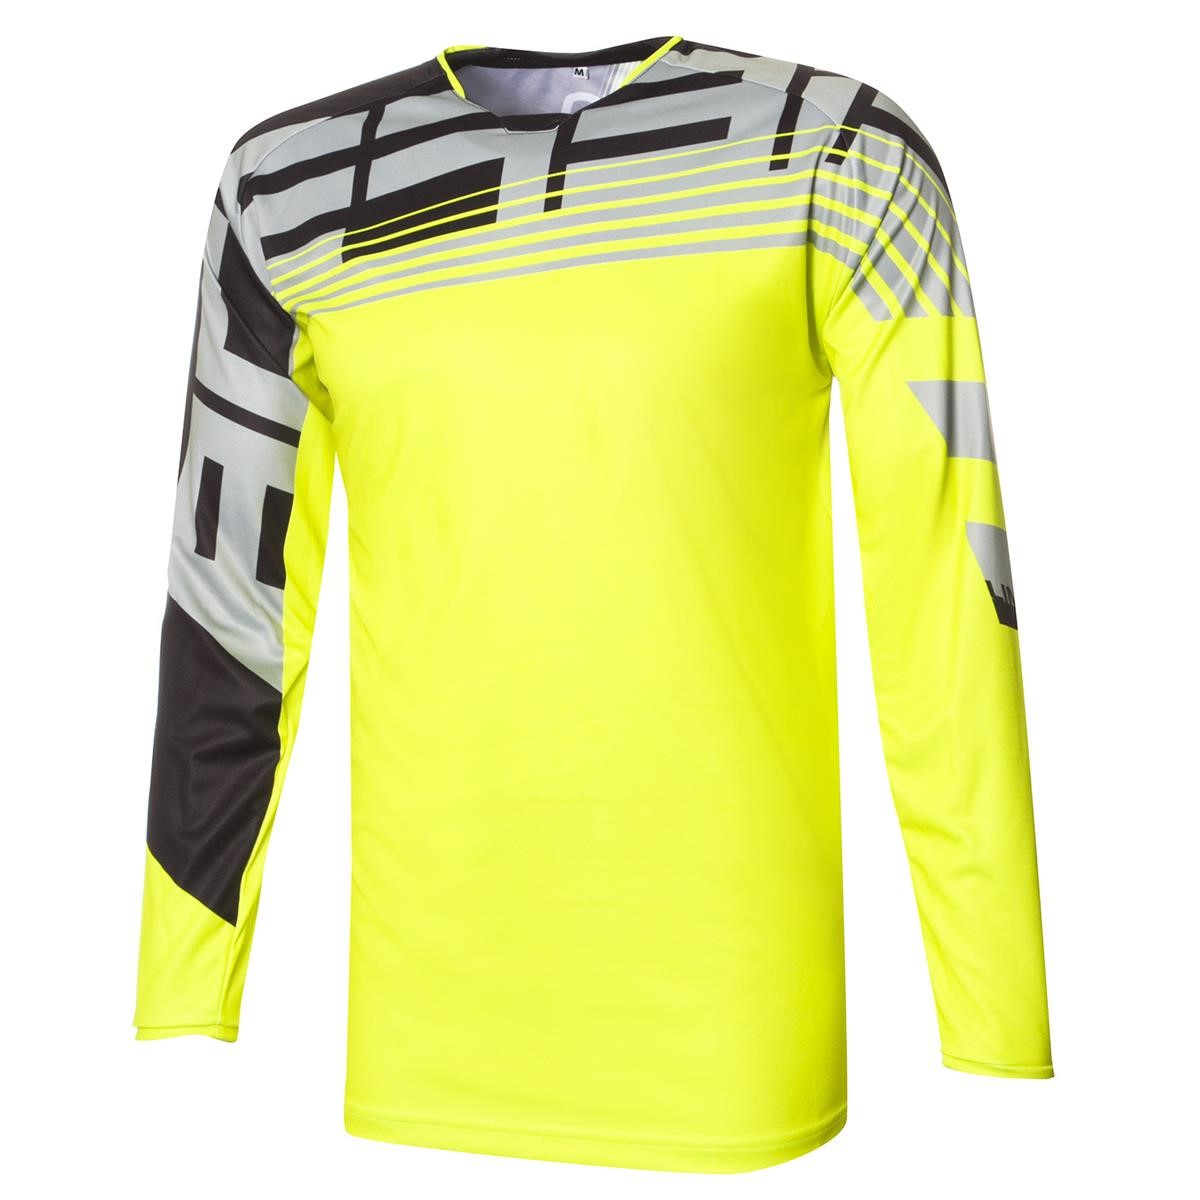 Acerbis Jersey Flashover Fluo Yellow/Black - Limited Edition